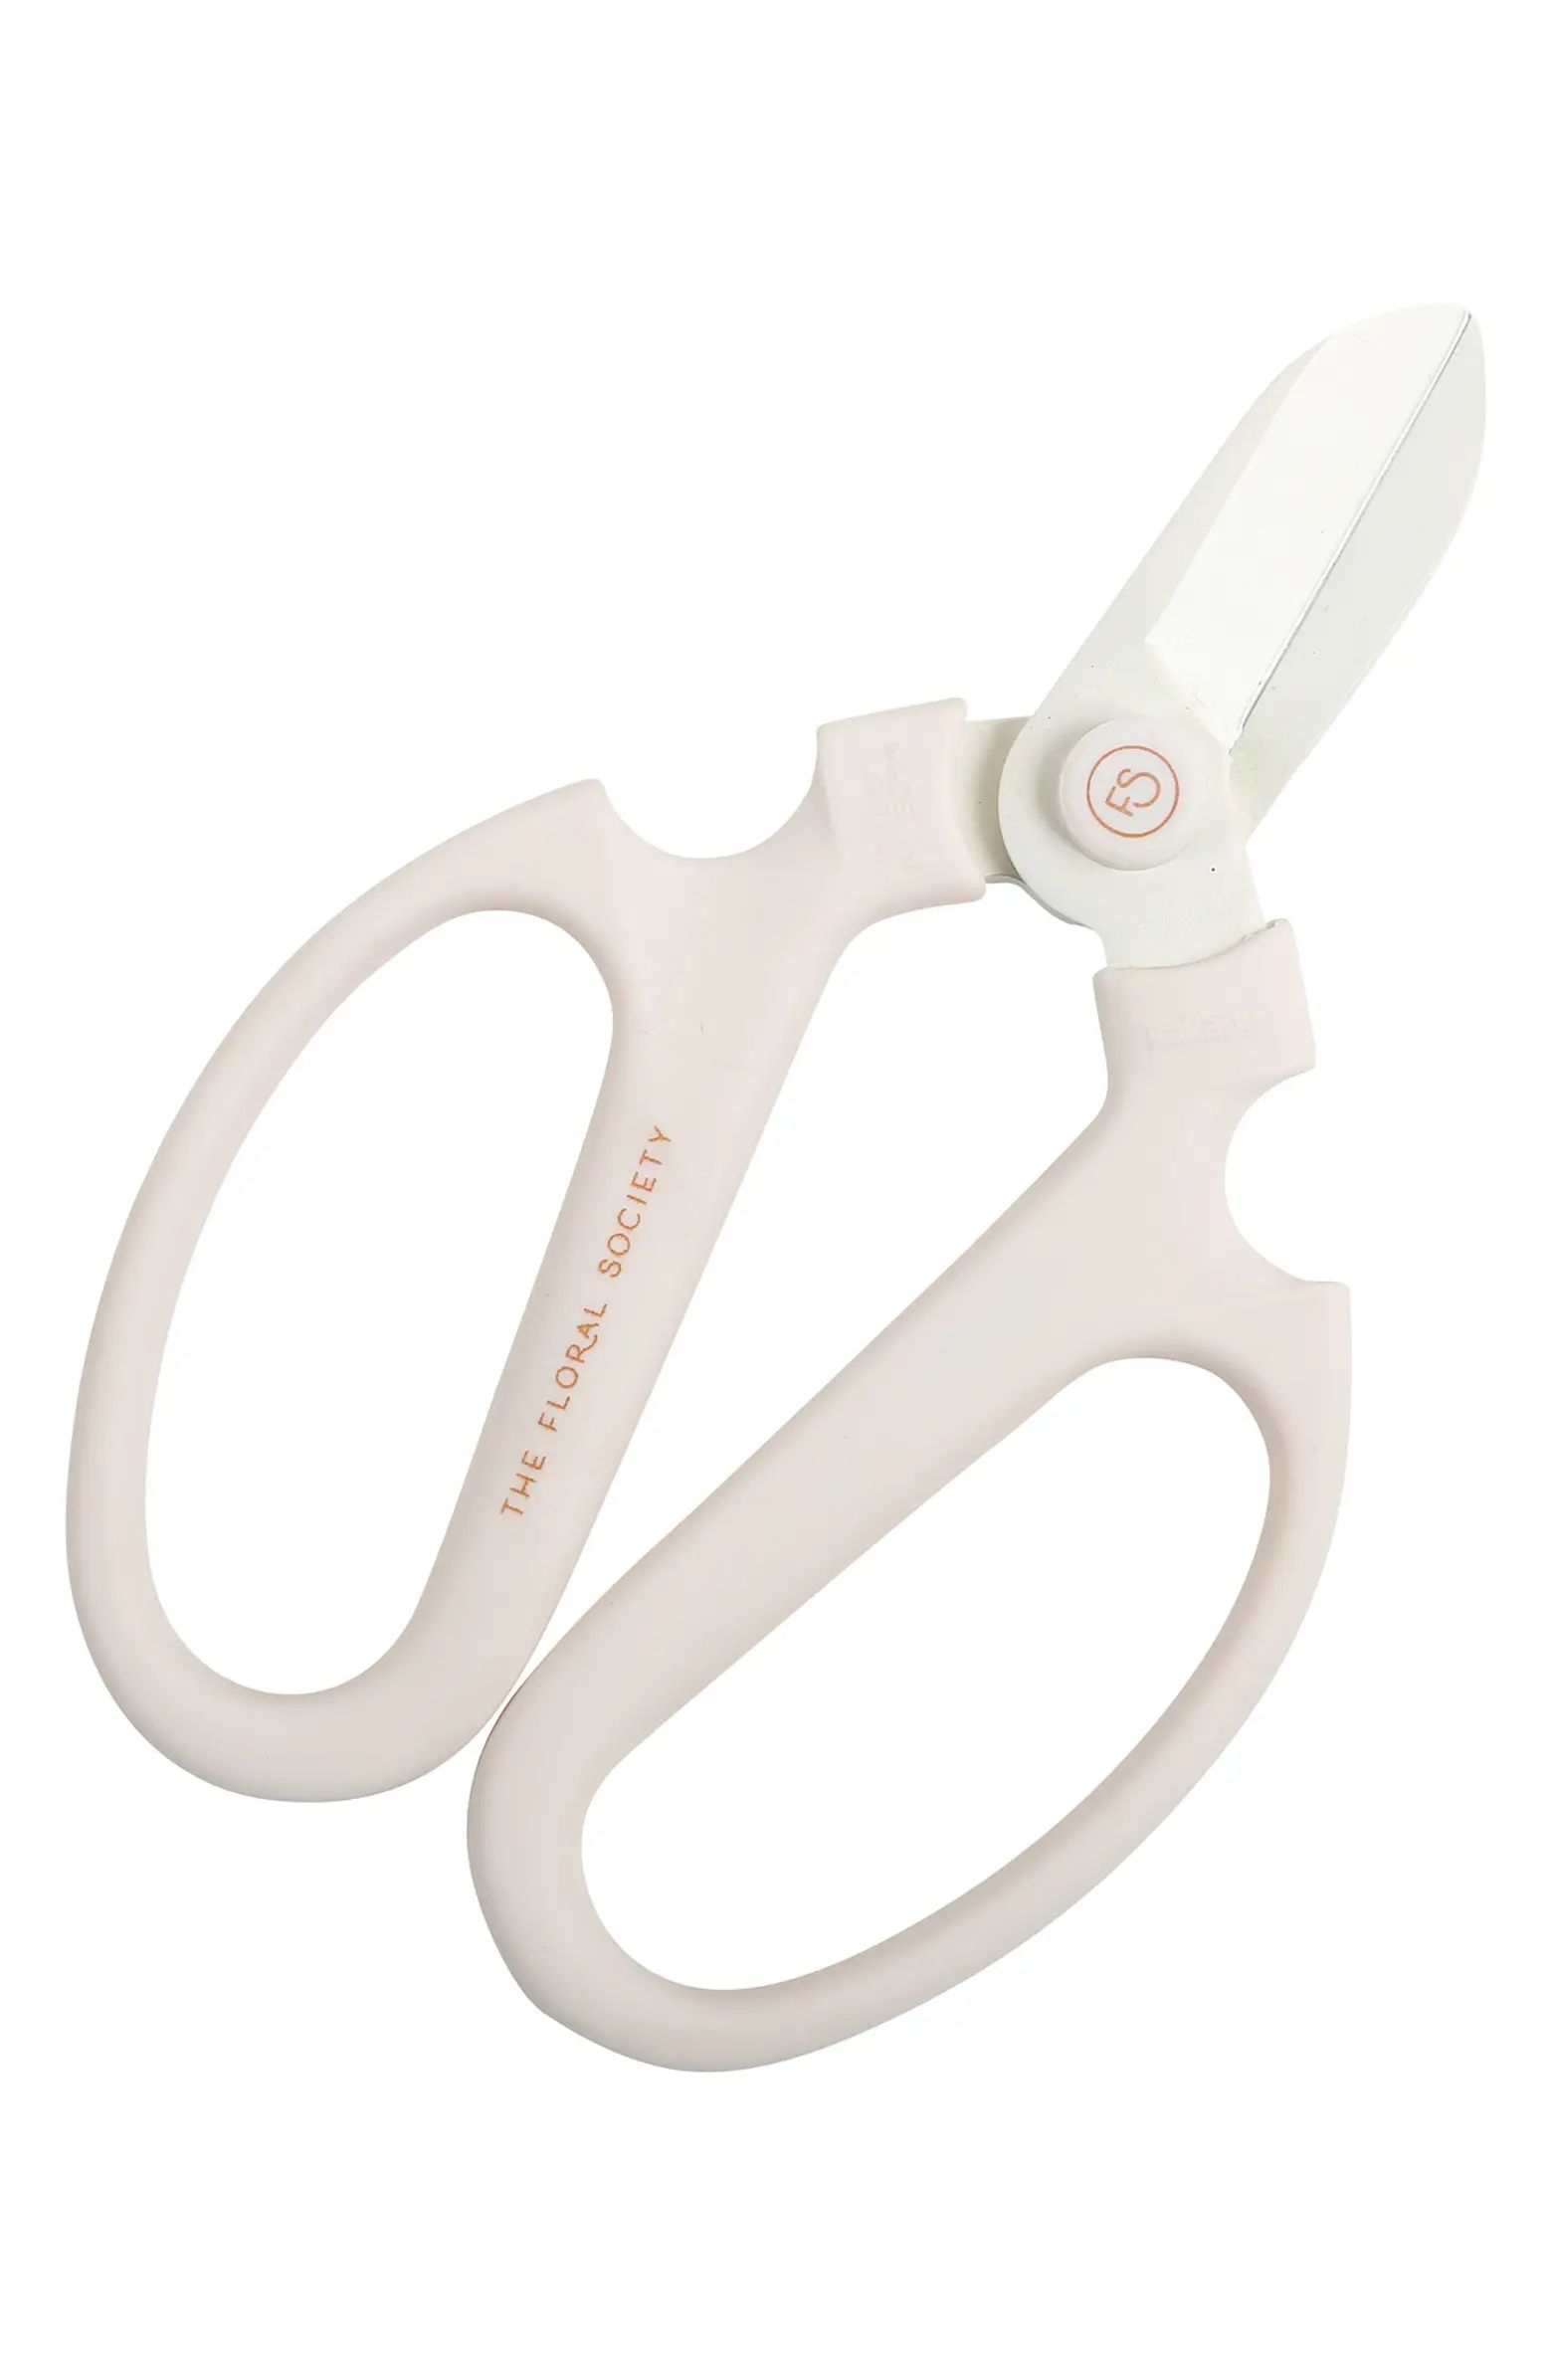 The Floral Society Floral Clippers | Nordstrom | Nordstrom